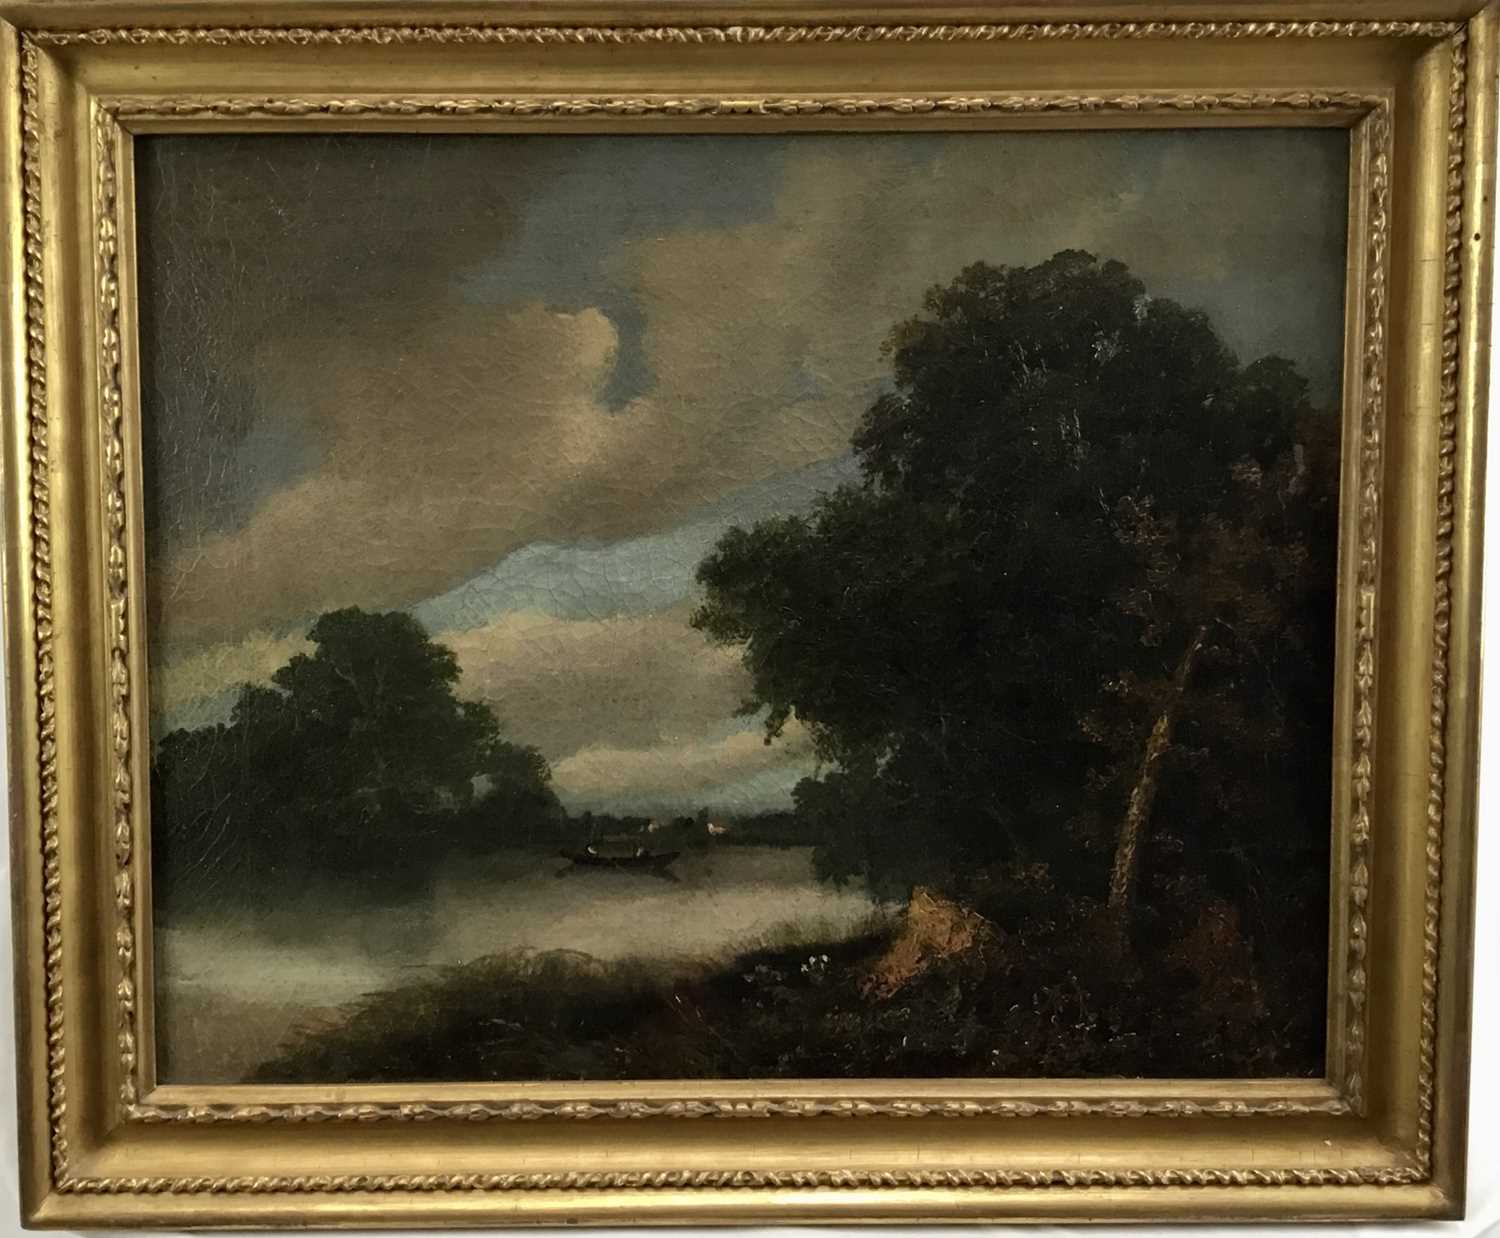 Lot 10 - oil on canvas landscape with fishermen in boat on a lake and village beyond, 52cm x 42cm in gilt frame